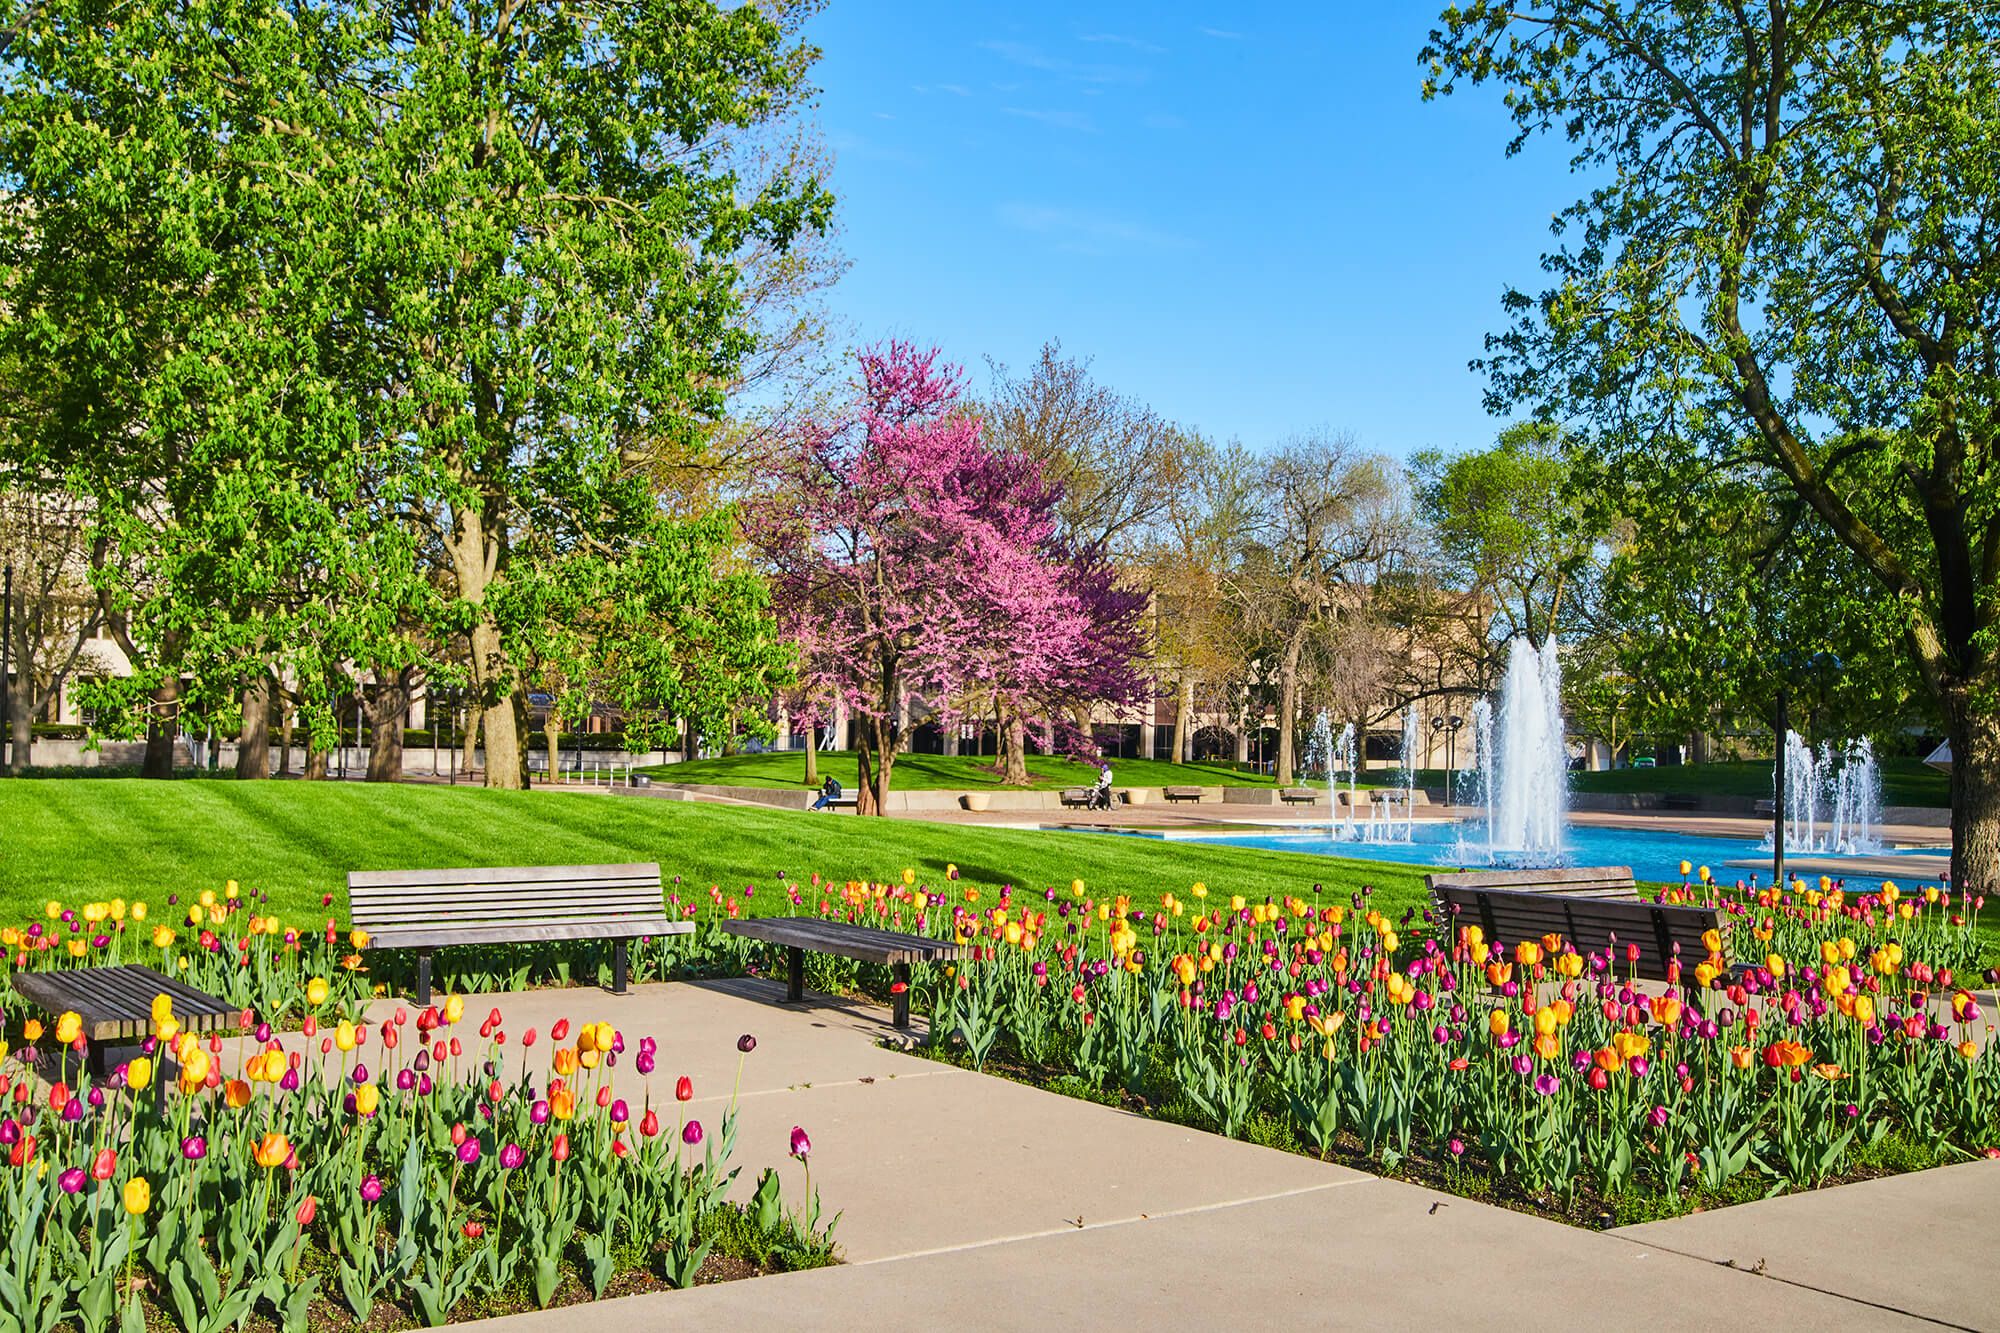 Showcasing the tulips with the fountain